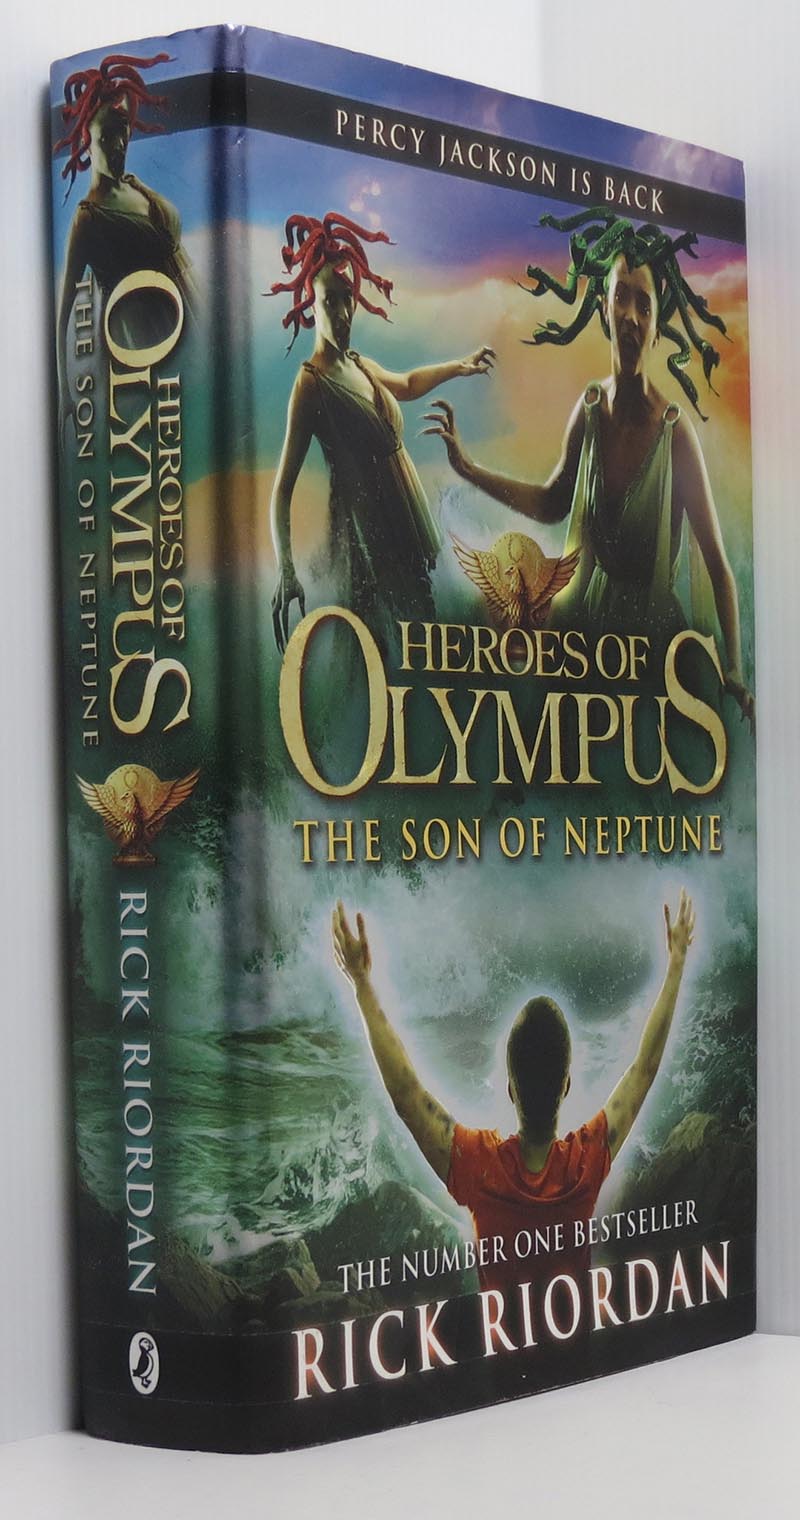 the son of neptune next book